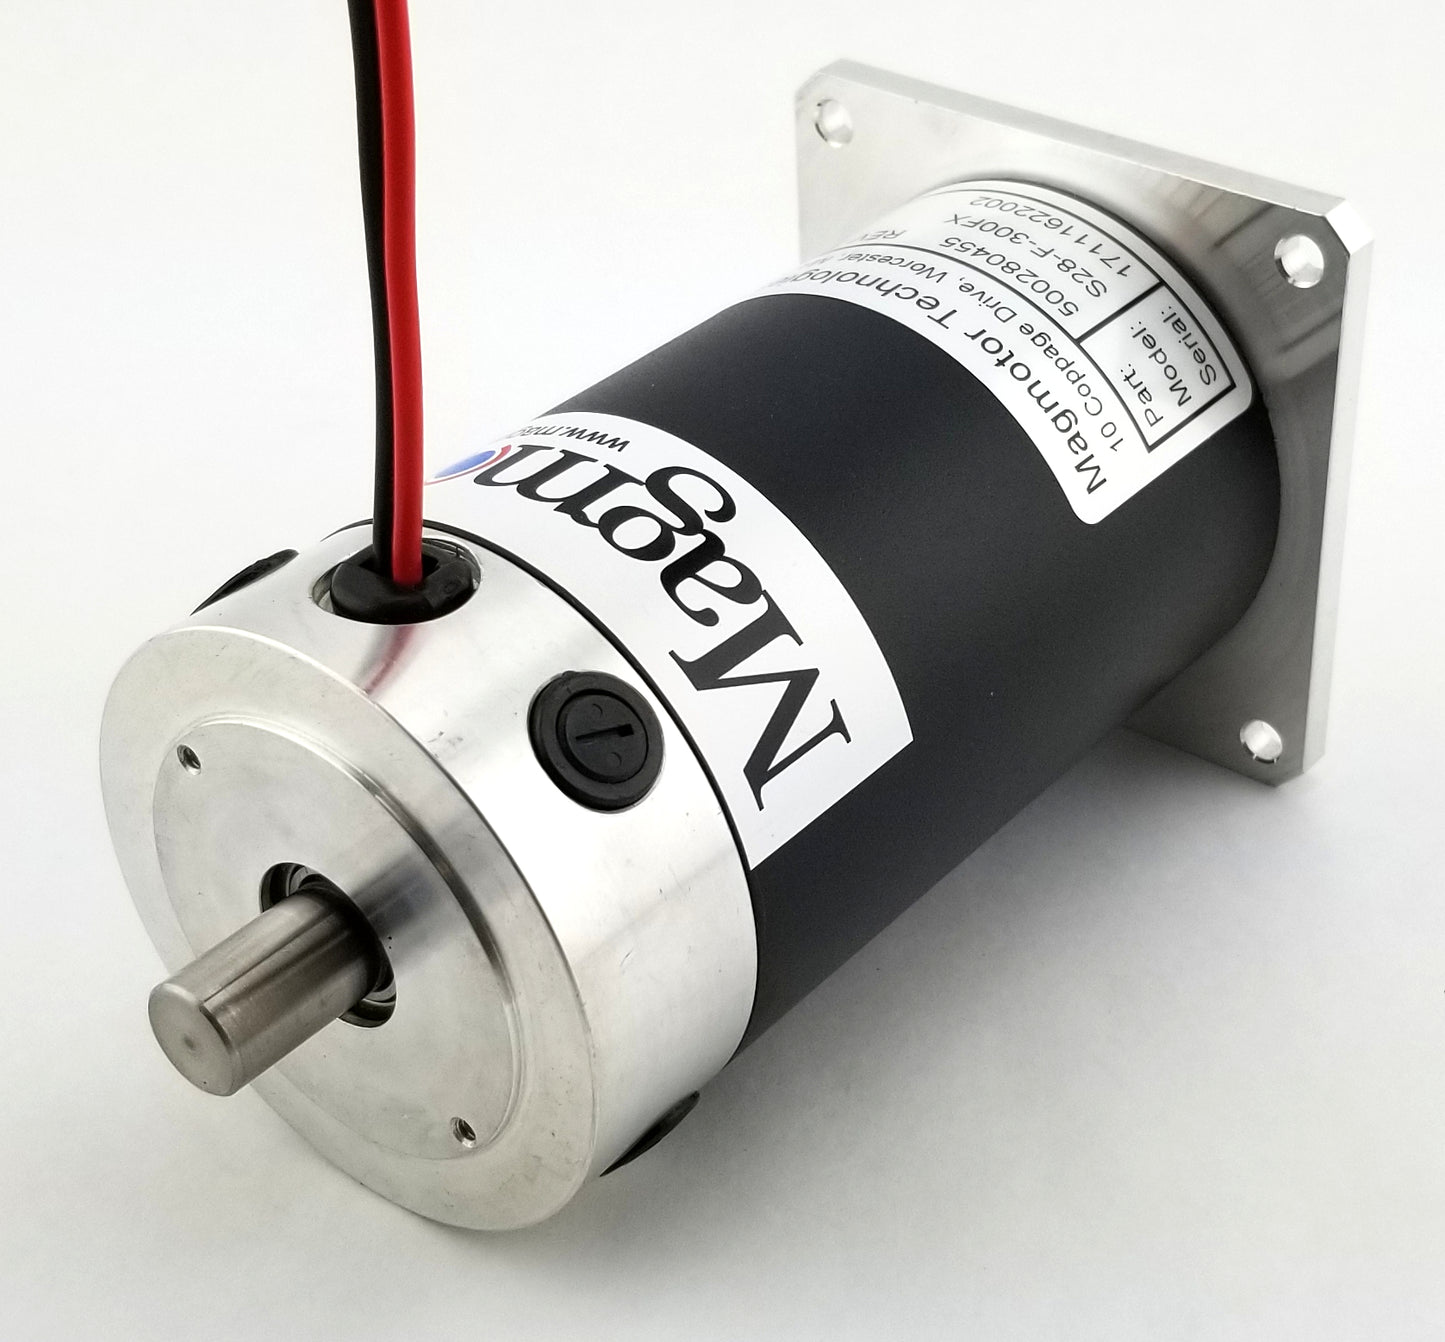 Magmotor S28-F-300FX 110 to 170 Volt 4 Pole Brushed Motor 500280455 Rear View